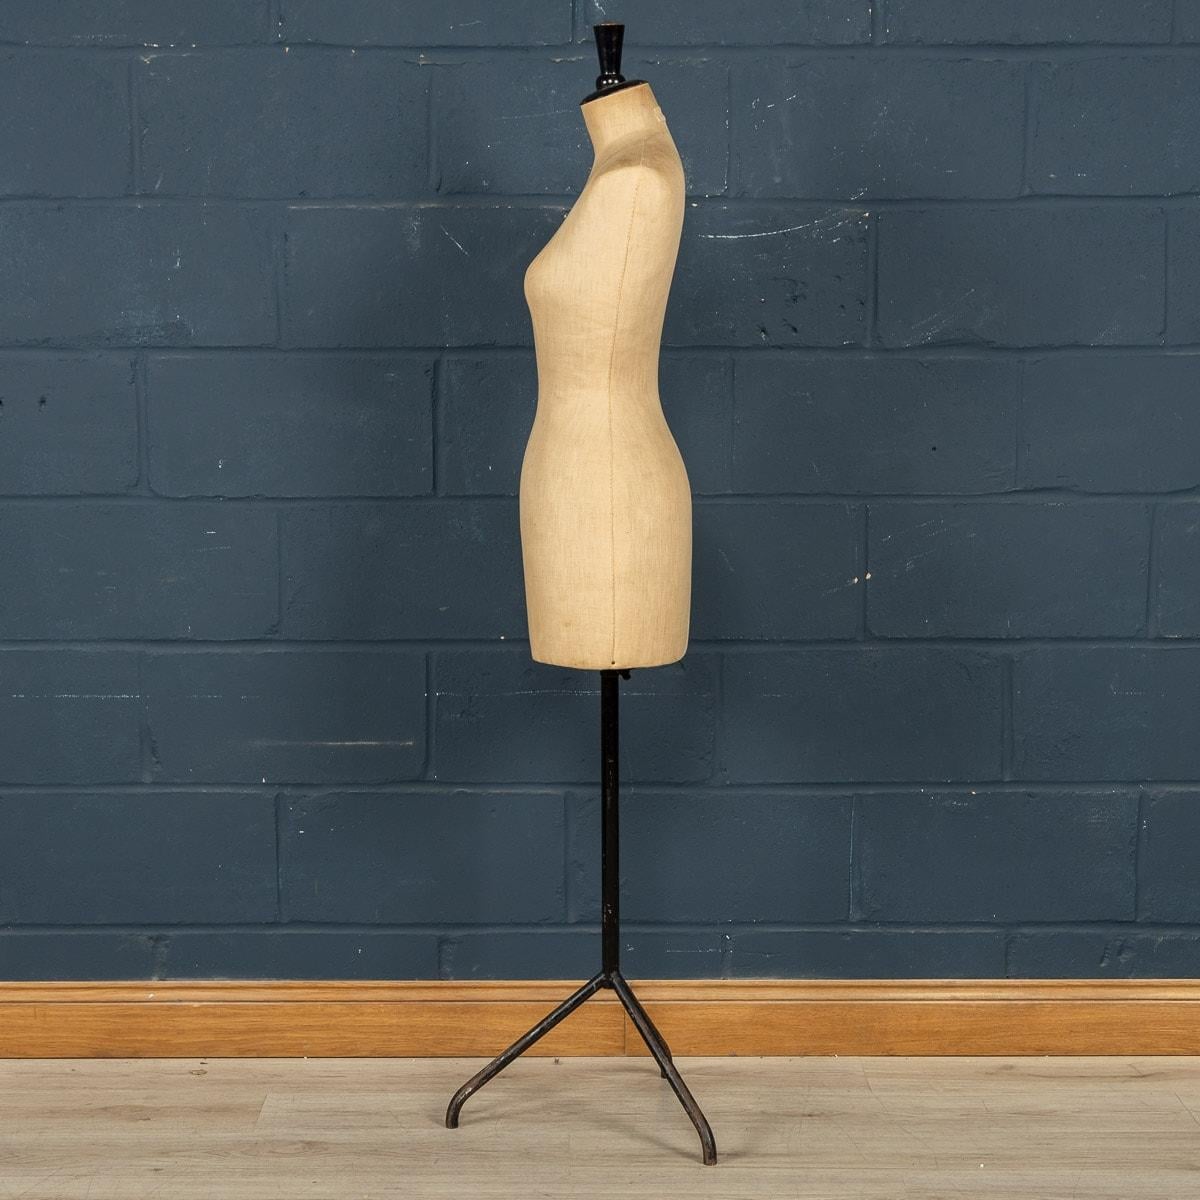 20th Century French Shop Mannequin, c.1910 For Sale 1